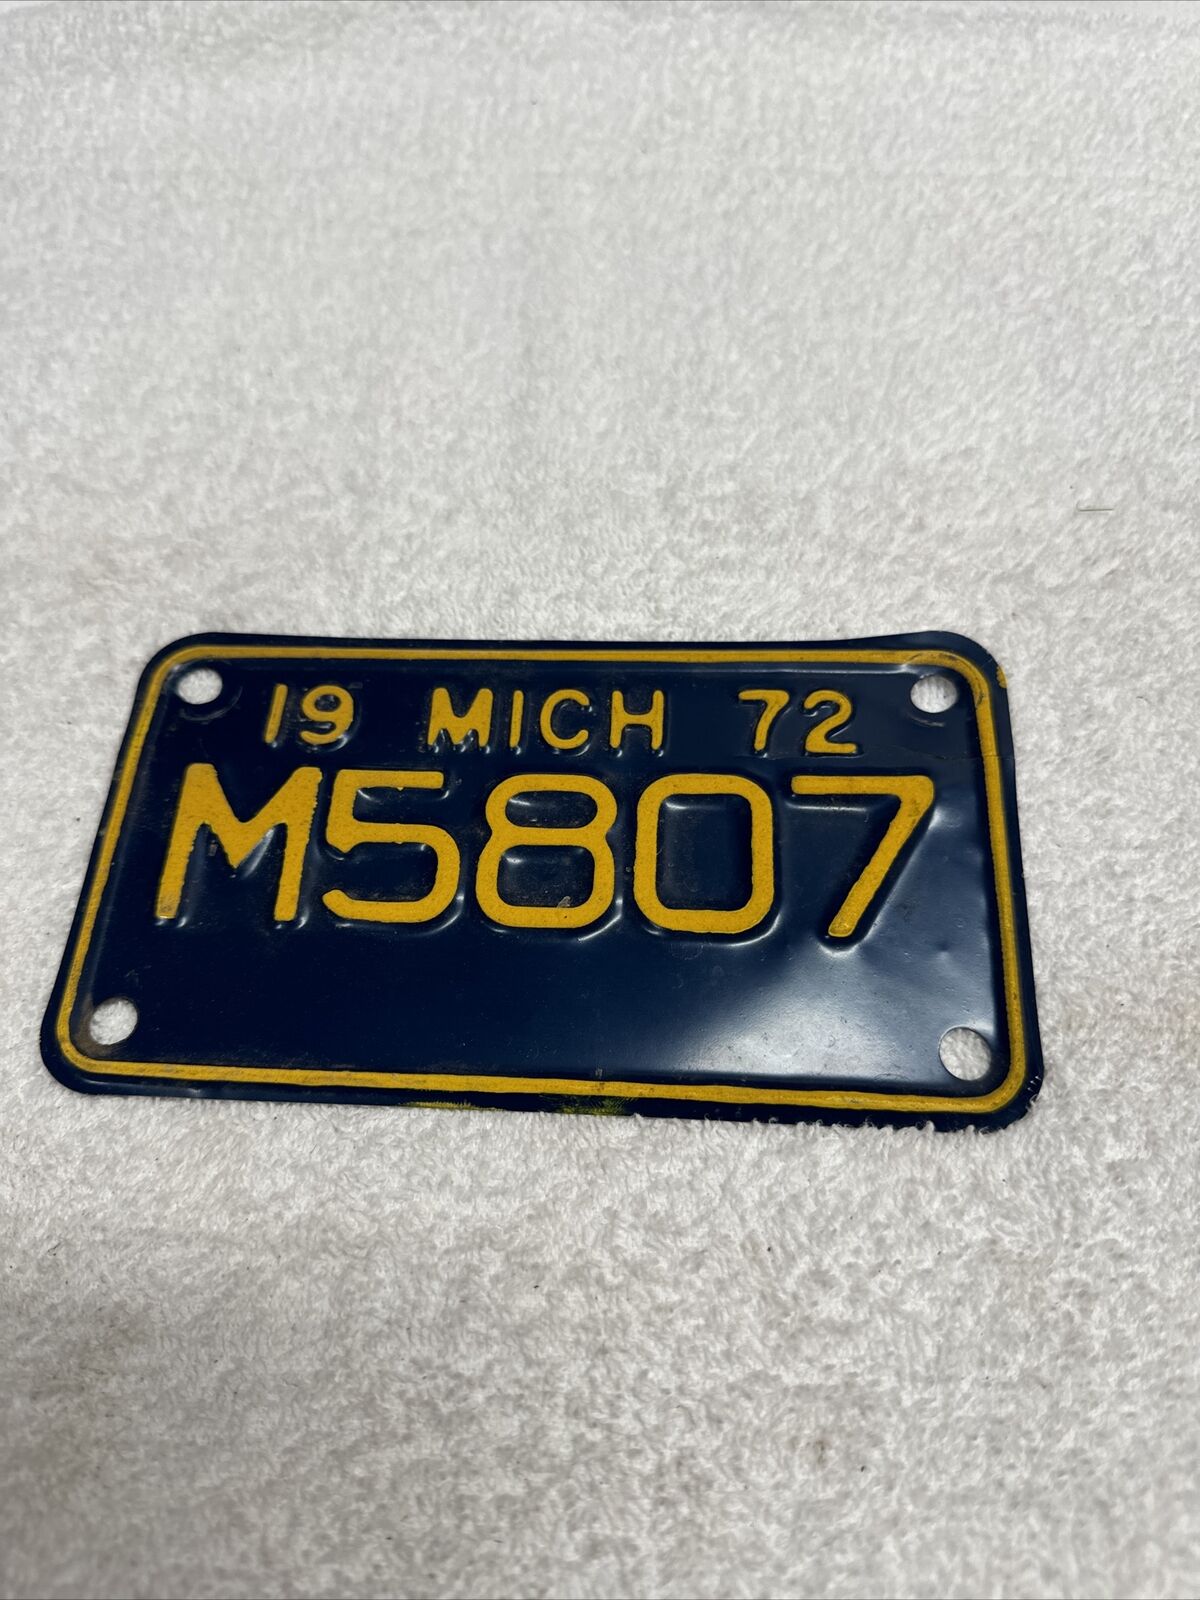 1972 Michigan Motorcycle License Plate M5807